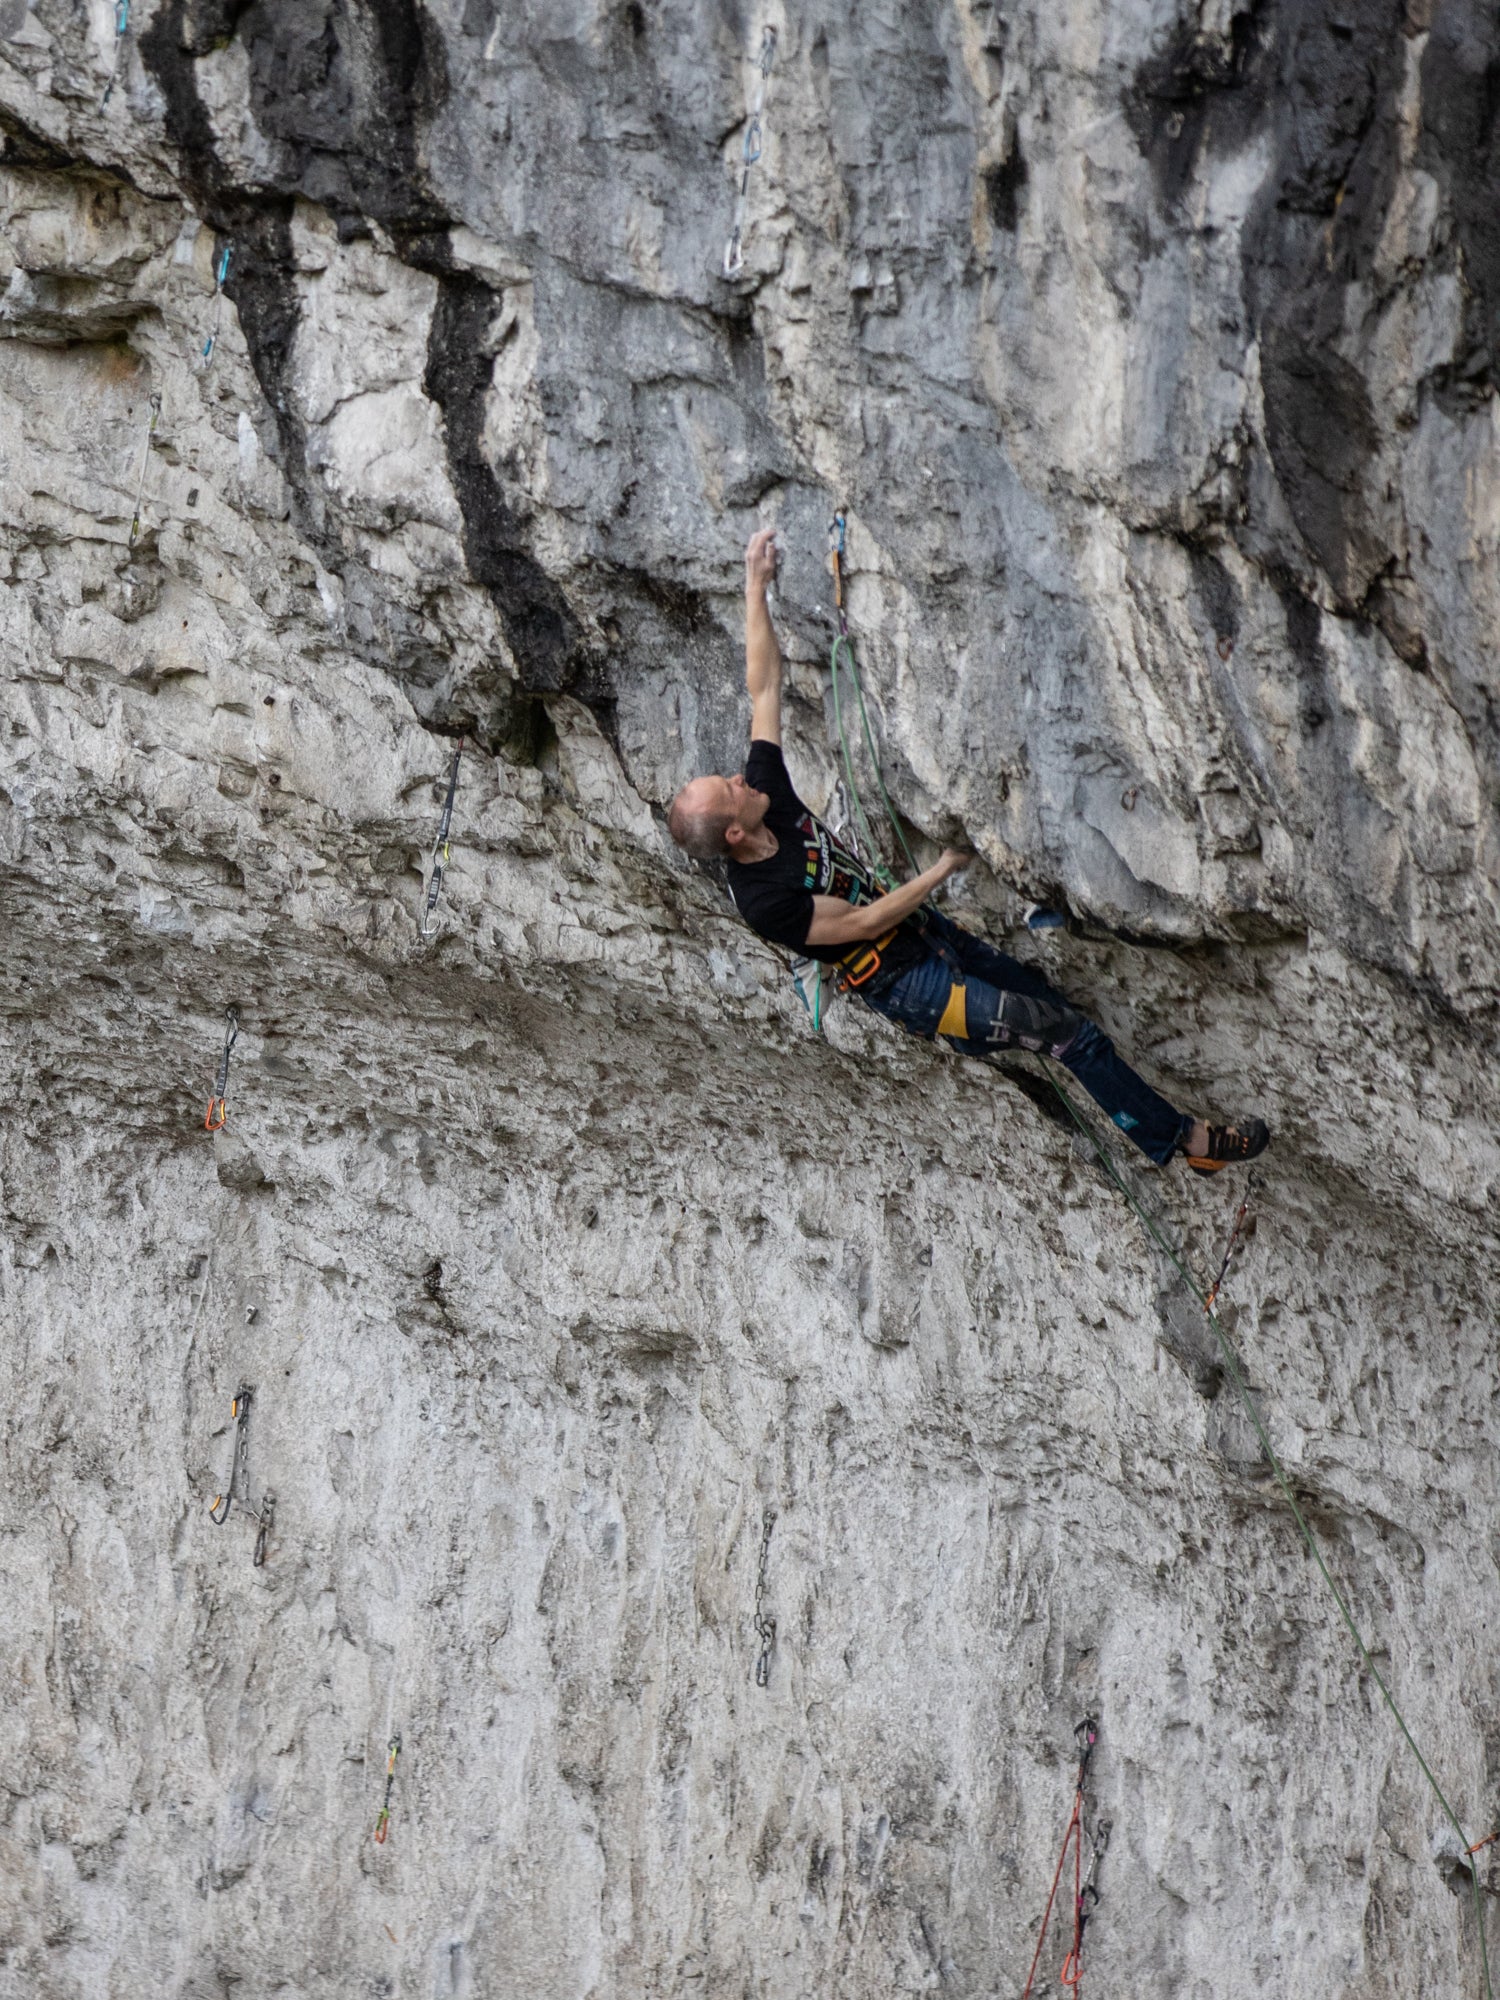 Yorkshire Limestone 2021 - Reflections on the sport climbing season by Ted Kingsnorth